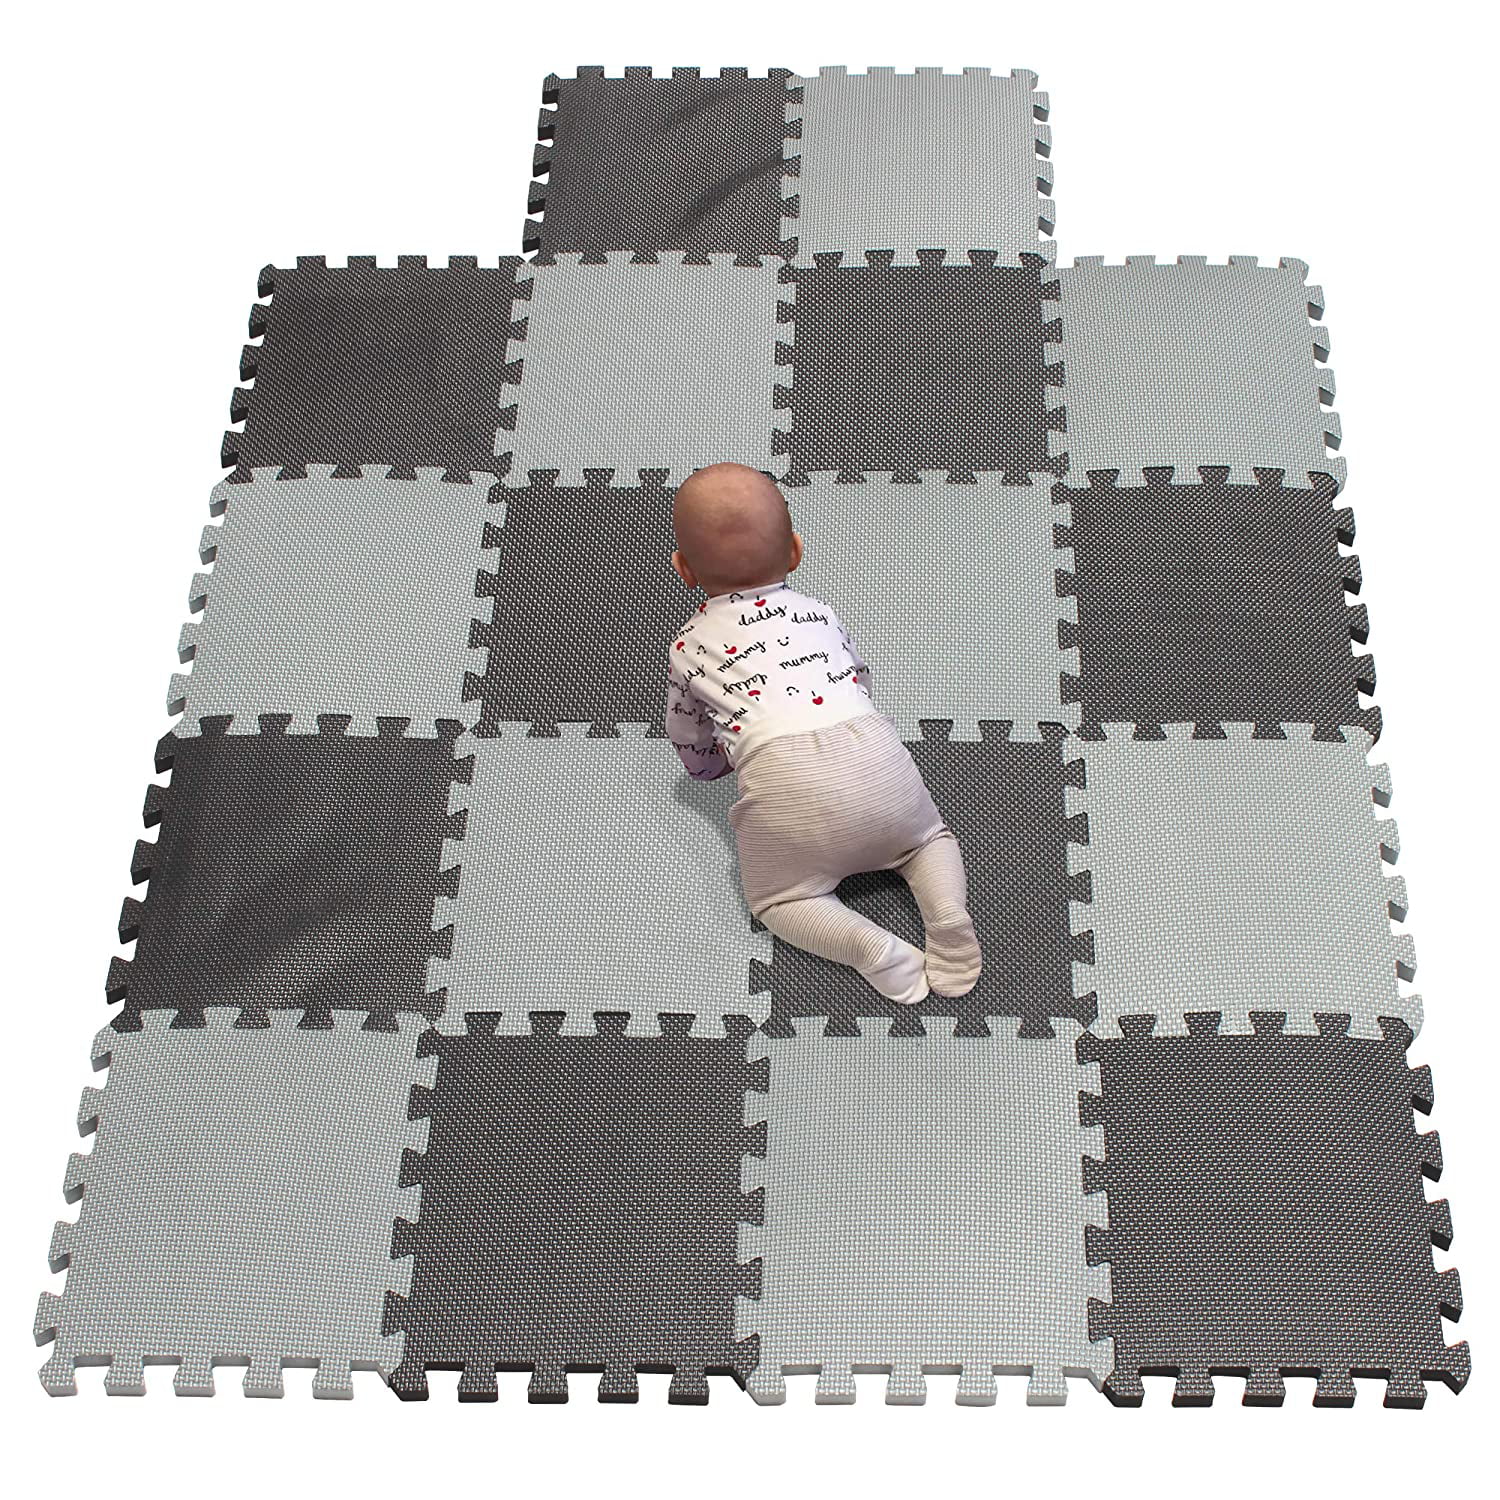 30X30 cm play Mat with With Borders Interlocking Gym Flooring Tiles Yoga Treadmill 20 Pieces EVA Foam Floor Mats Cushion For Kids Baby Infants Playroom Workout Home Gym Puzzle Exercise Mat 12 x 12